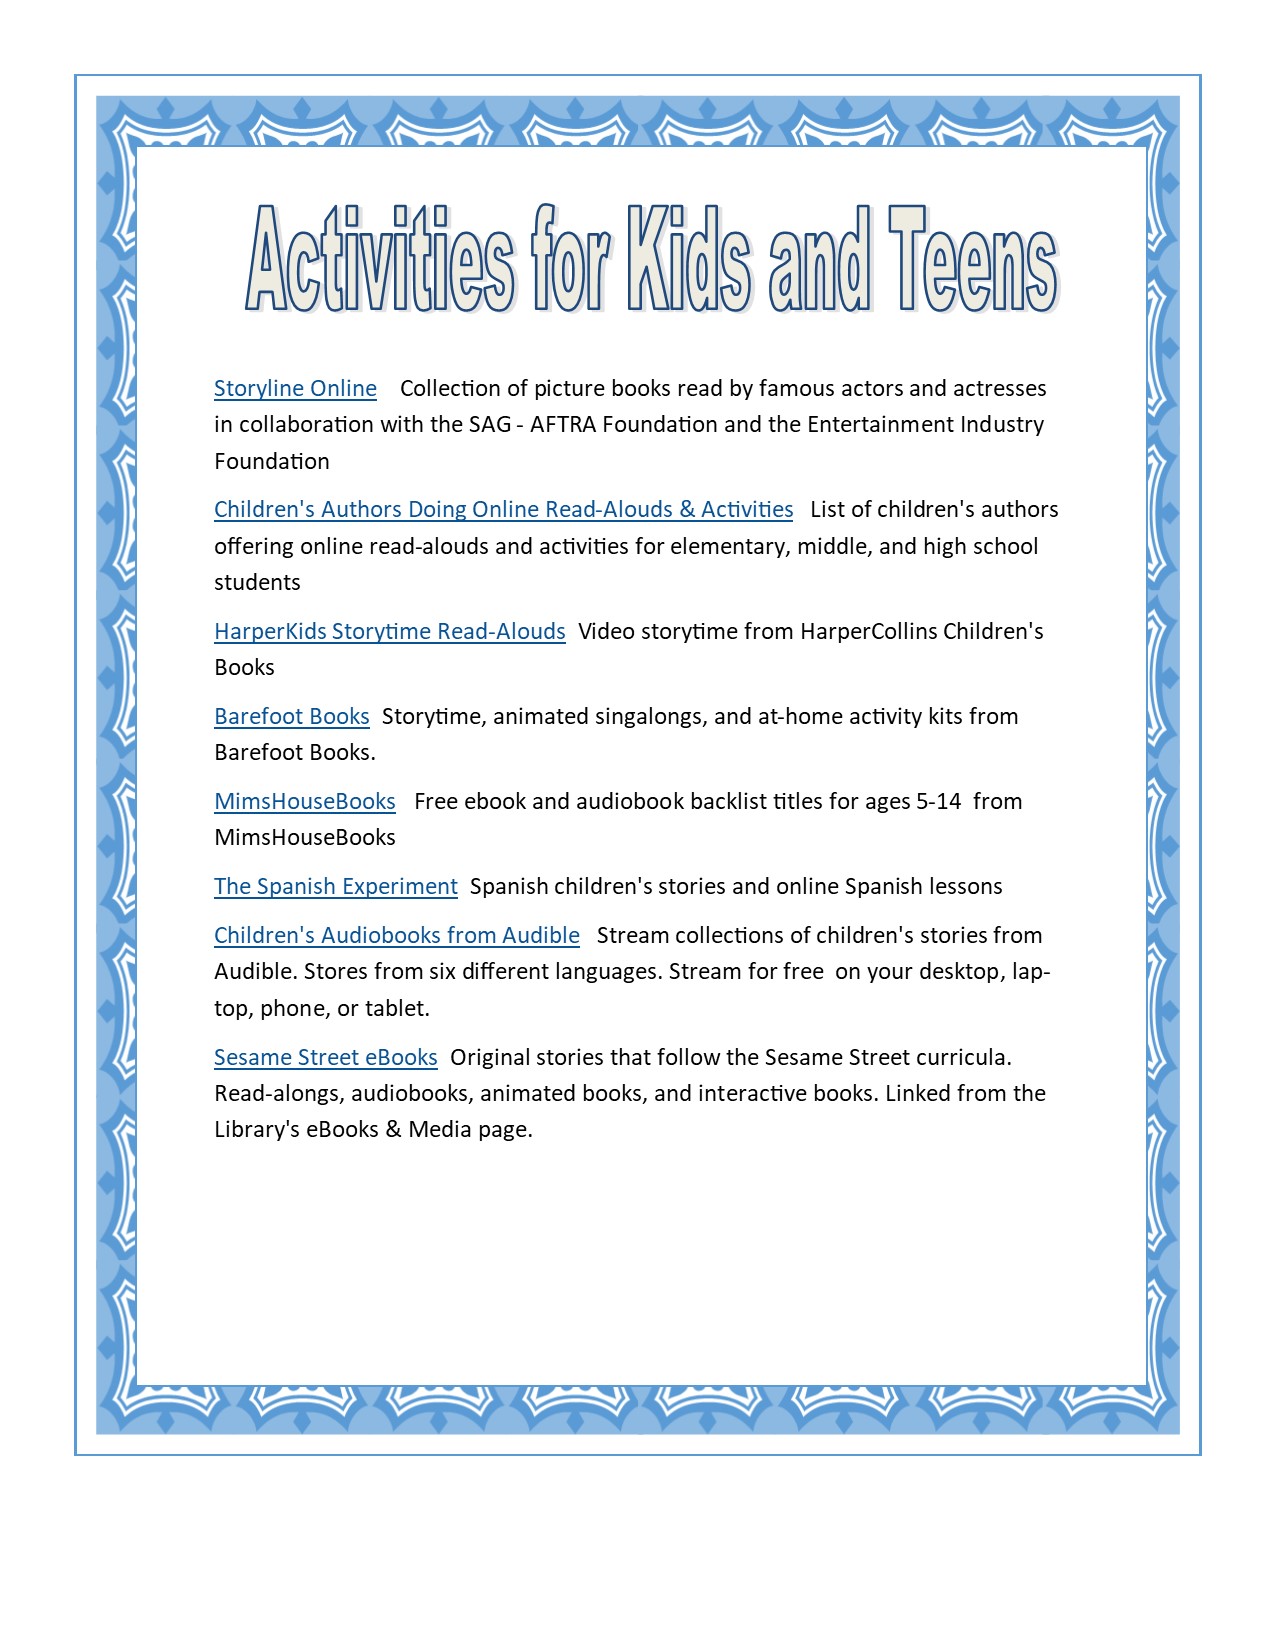 Activities for kids and teens